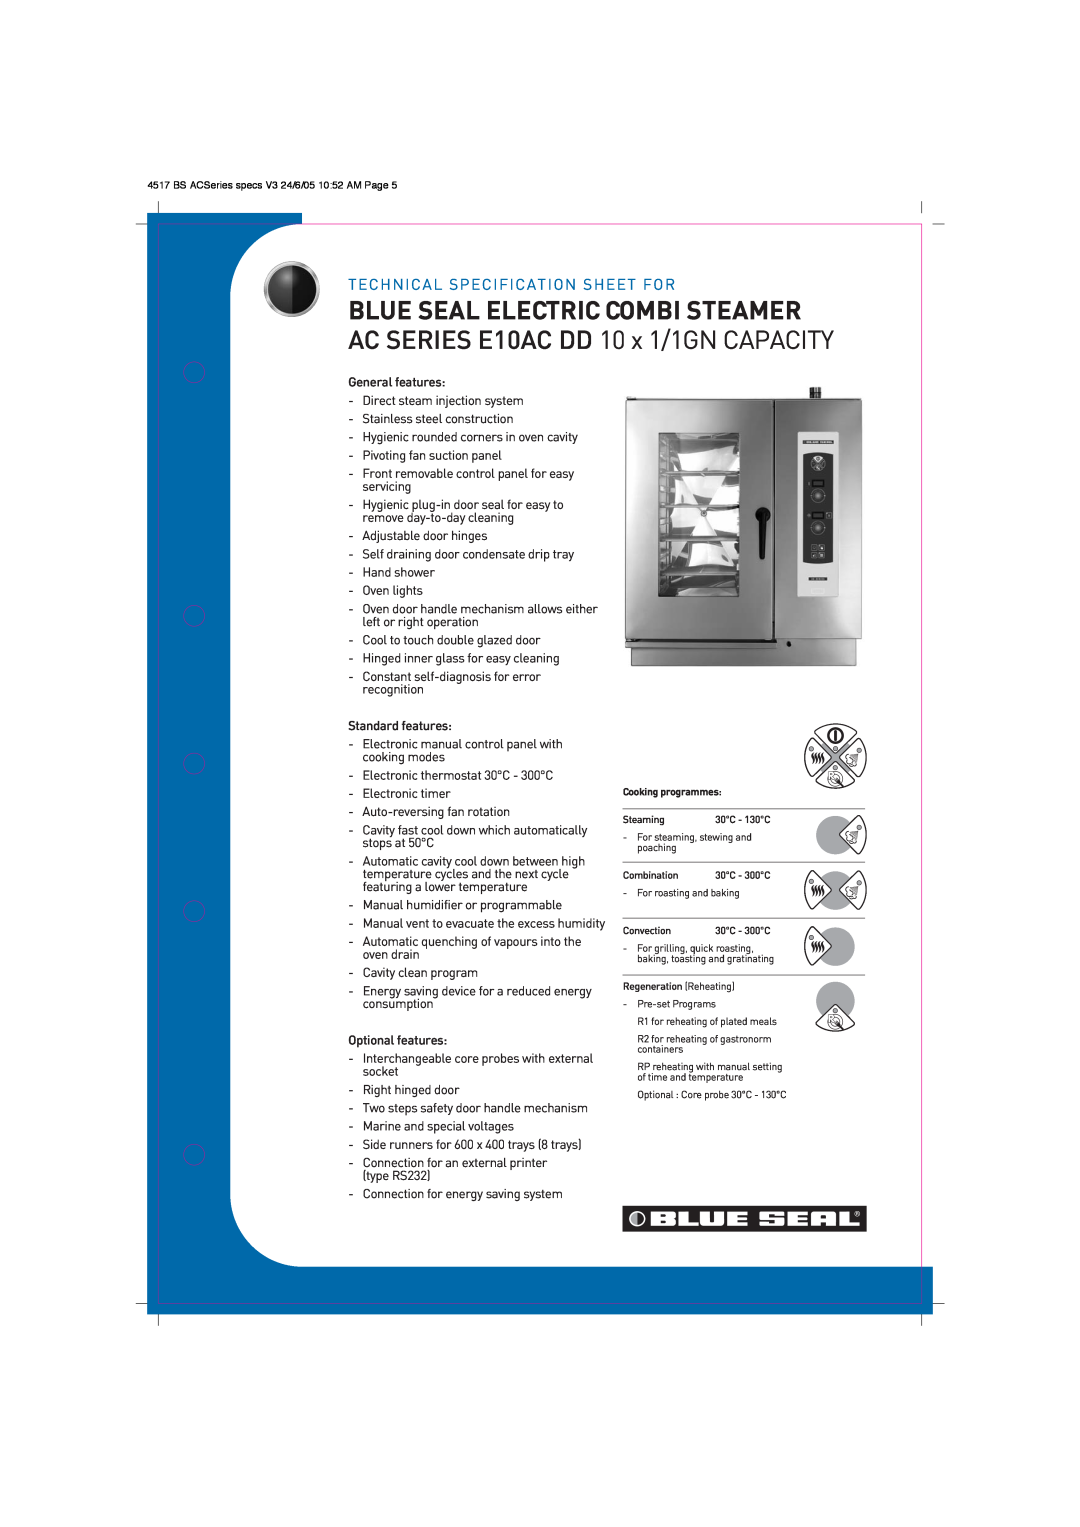 Moffat technical specifications Blue Seal Electric Combi Steamer, AC SERIES E10AC DD 10 x 1/1GN CAPACITY 